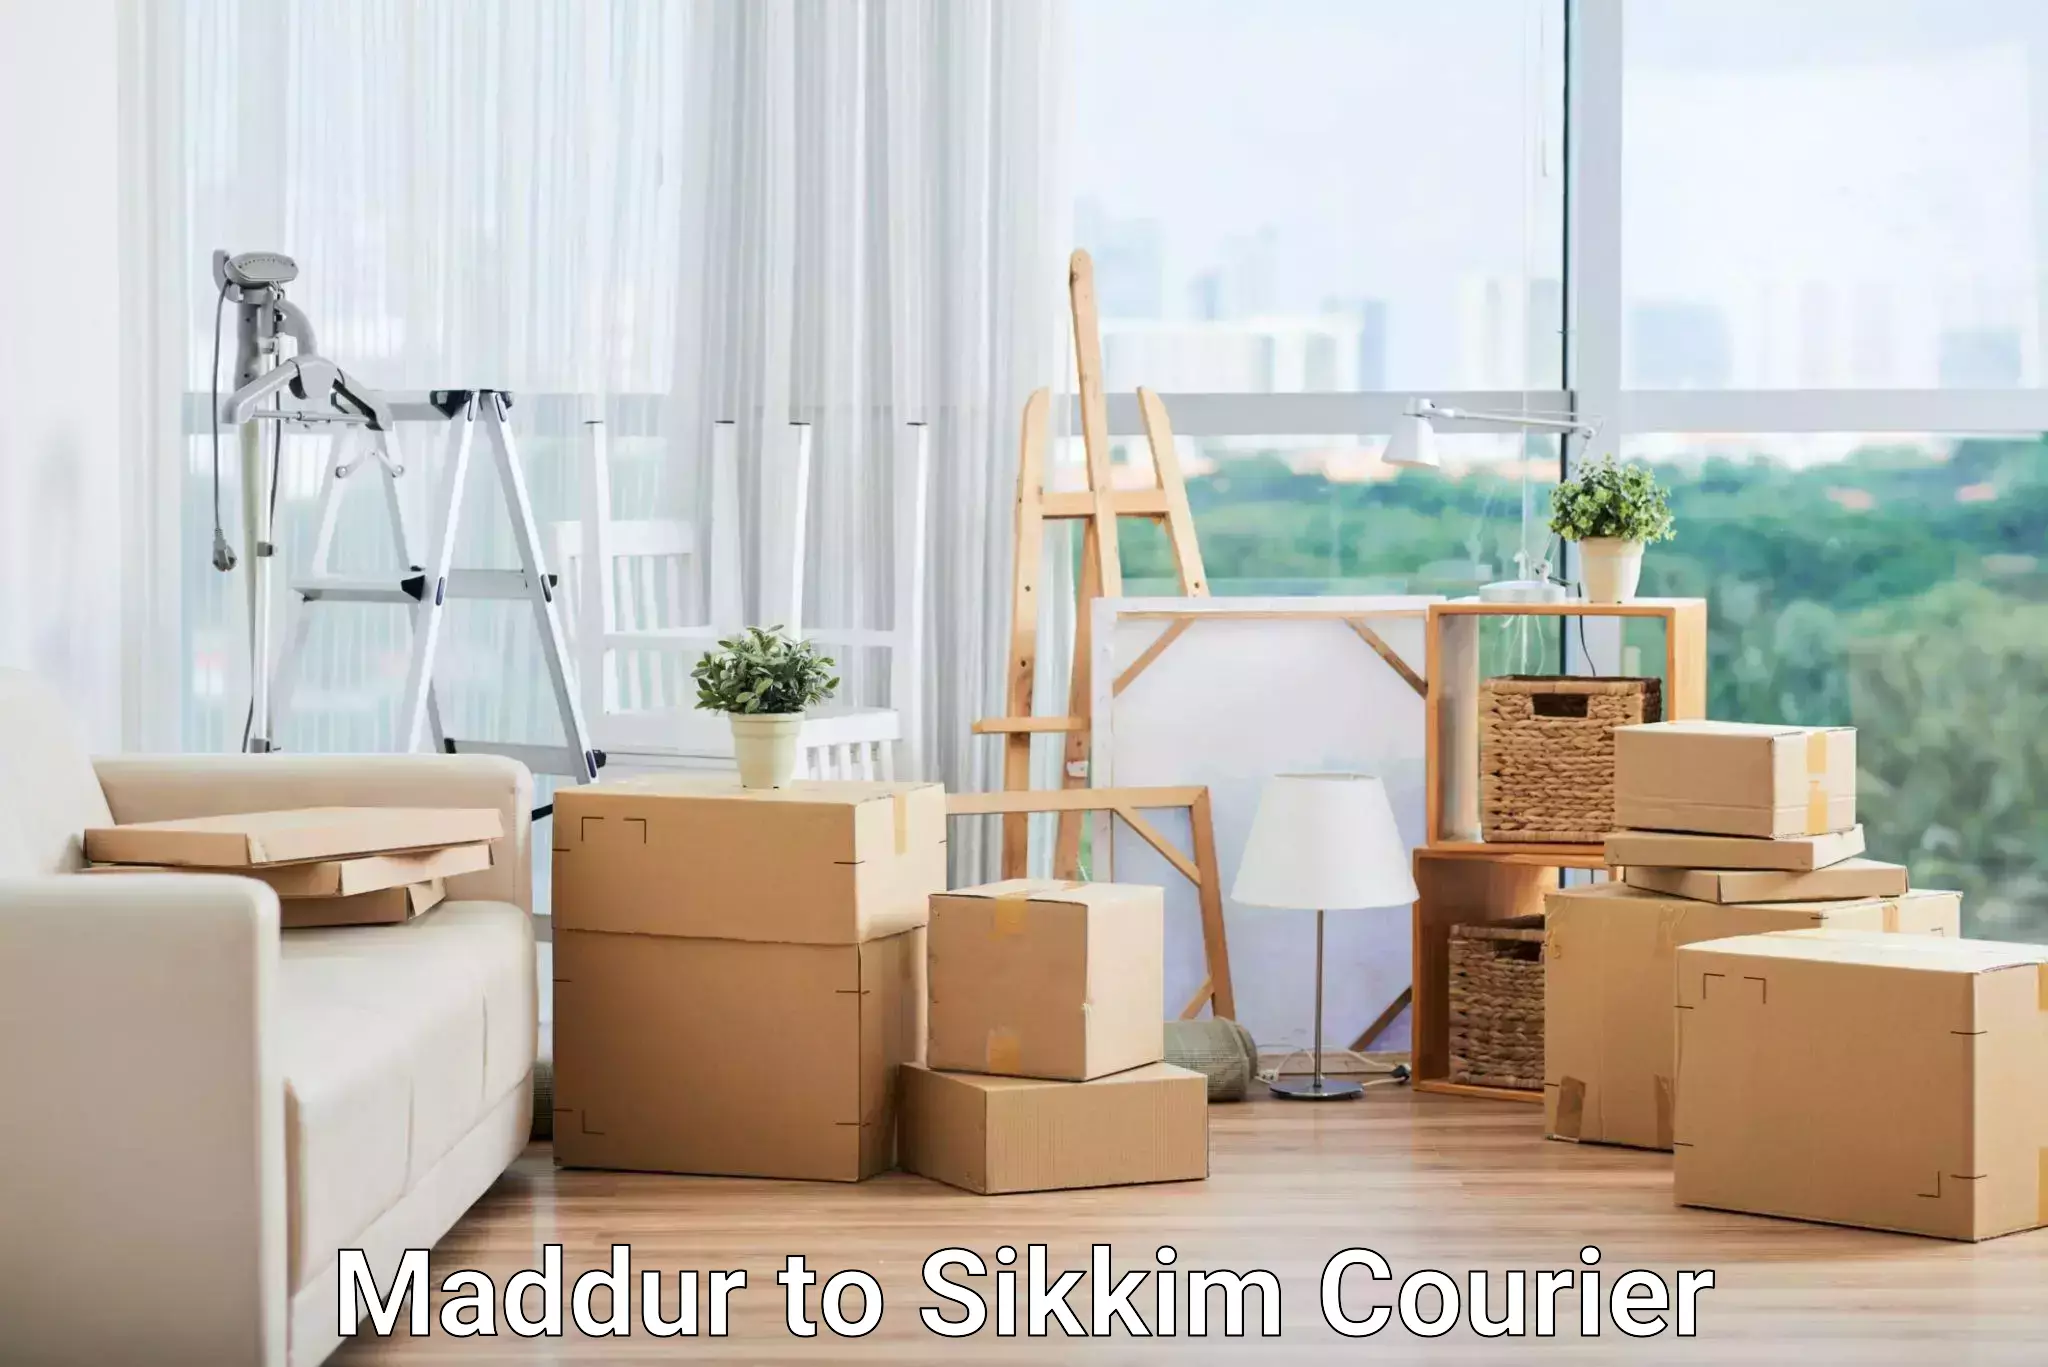 Residential courier service Maddur to Geyzing